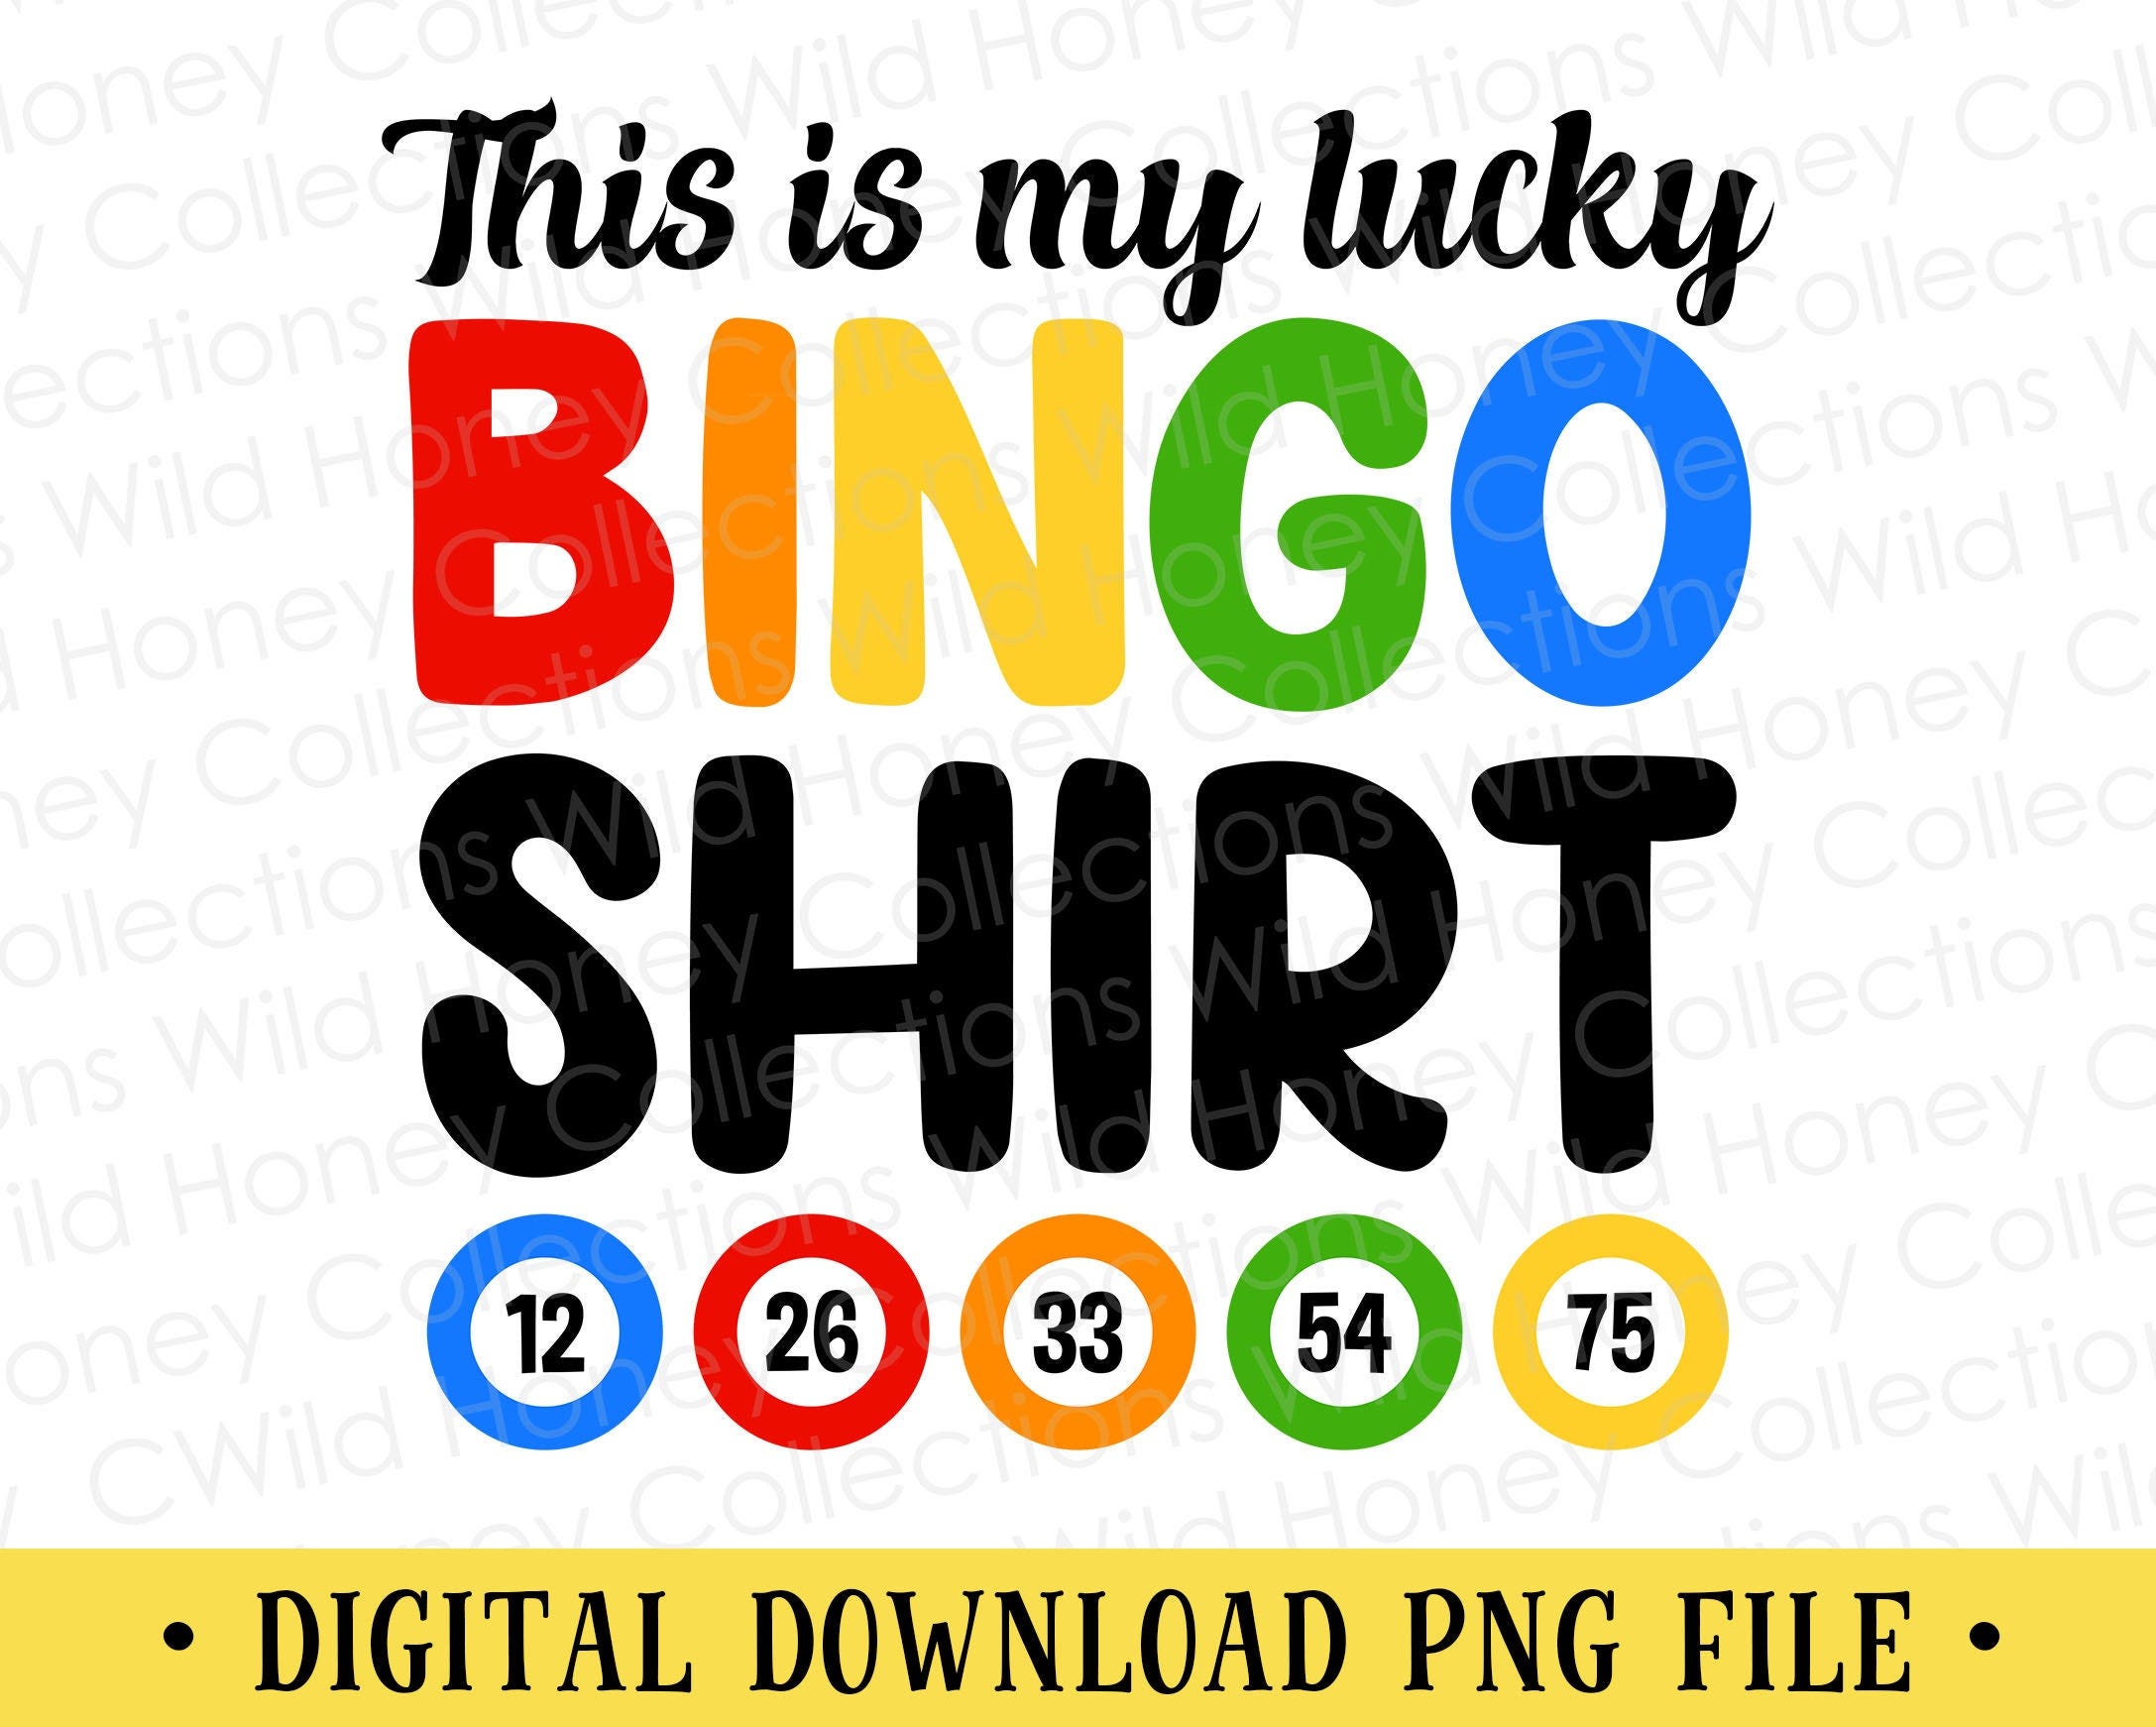 This is my Lucky Bingo Shirt, PNG File, T-Shirt Design, Crafting, Sublimation, INSTANT DOWNLOAD